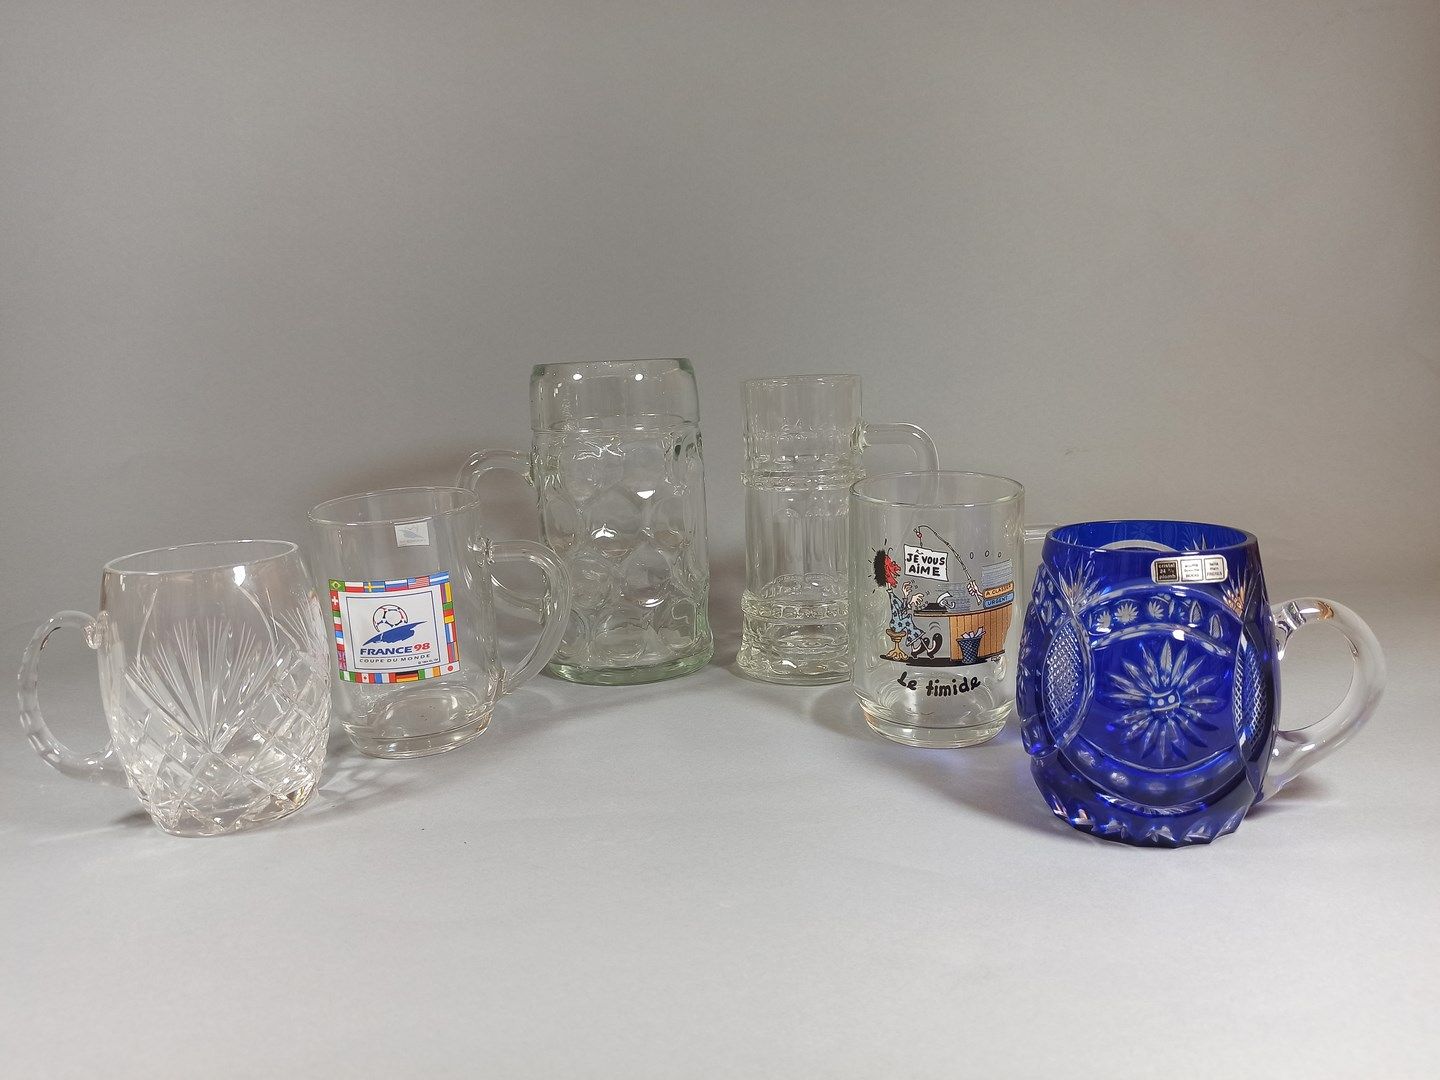 Null Set of 6 beer mugs, 2 in crystal and 4 in glass. 

(Fragments)